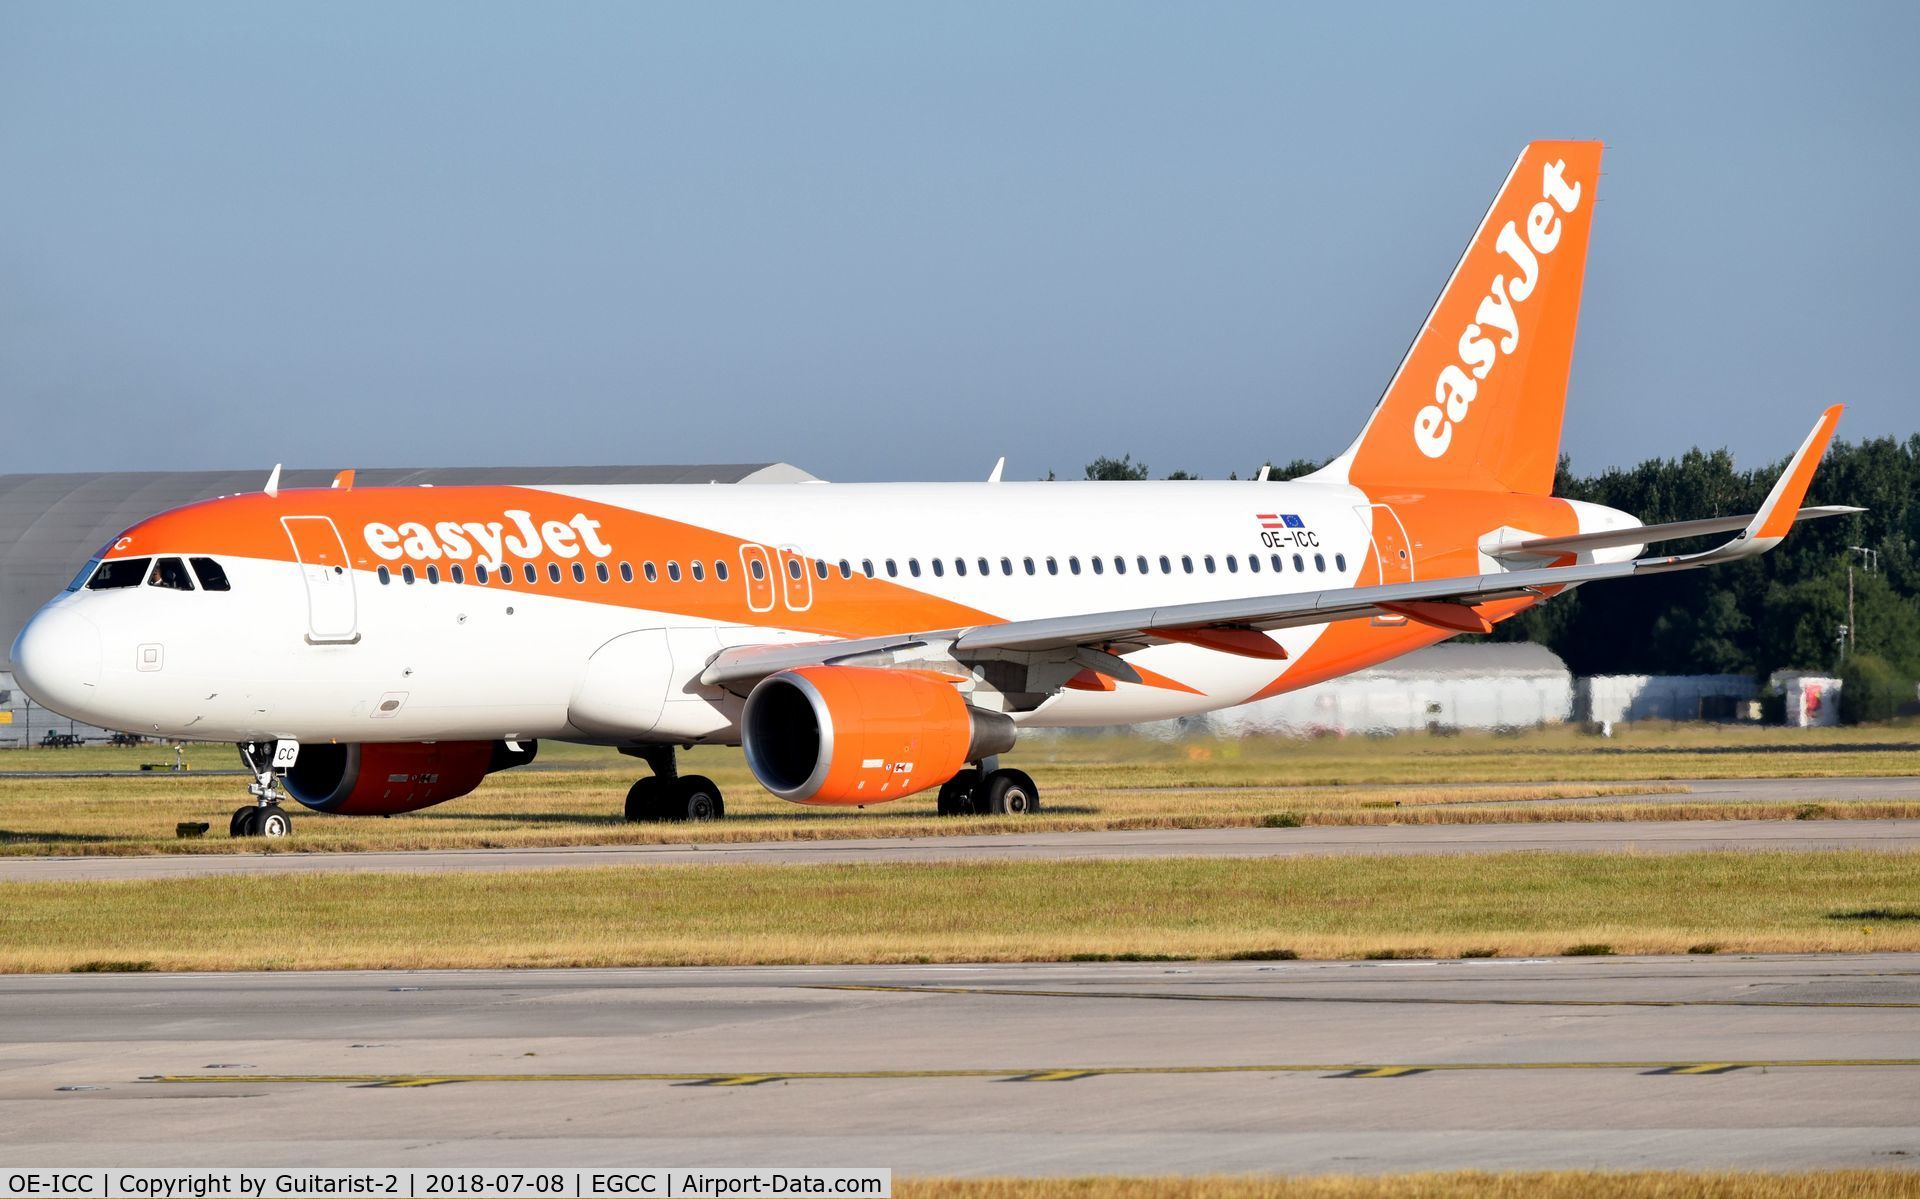 OE-ICC, 2015 Airbus A320-214 C/N 6680, At Manchester